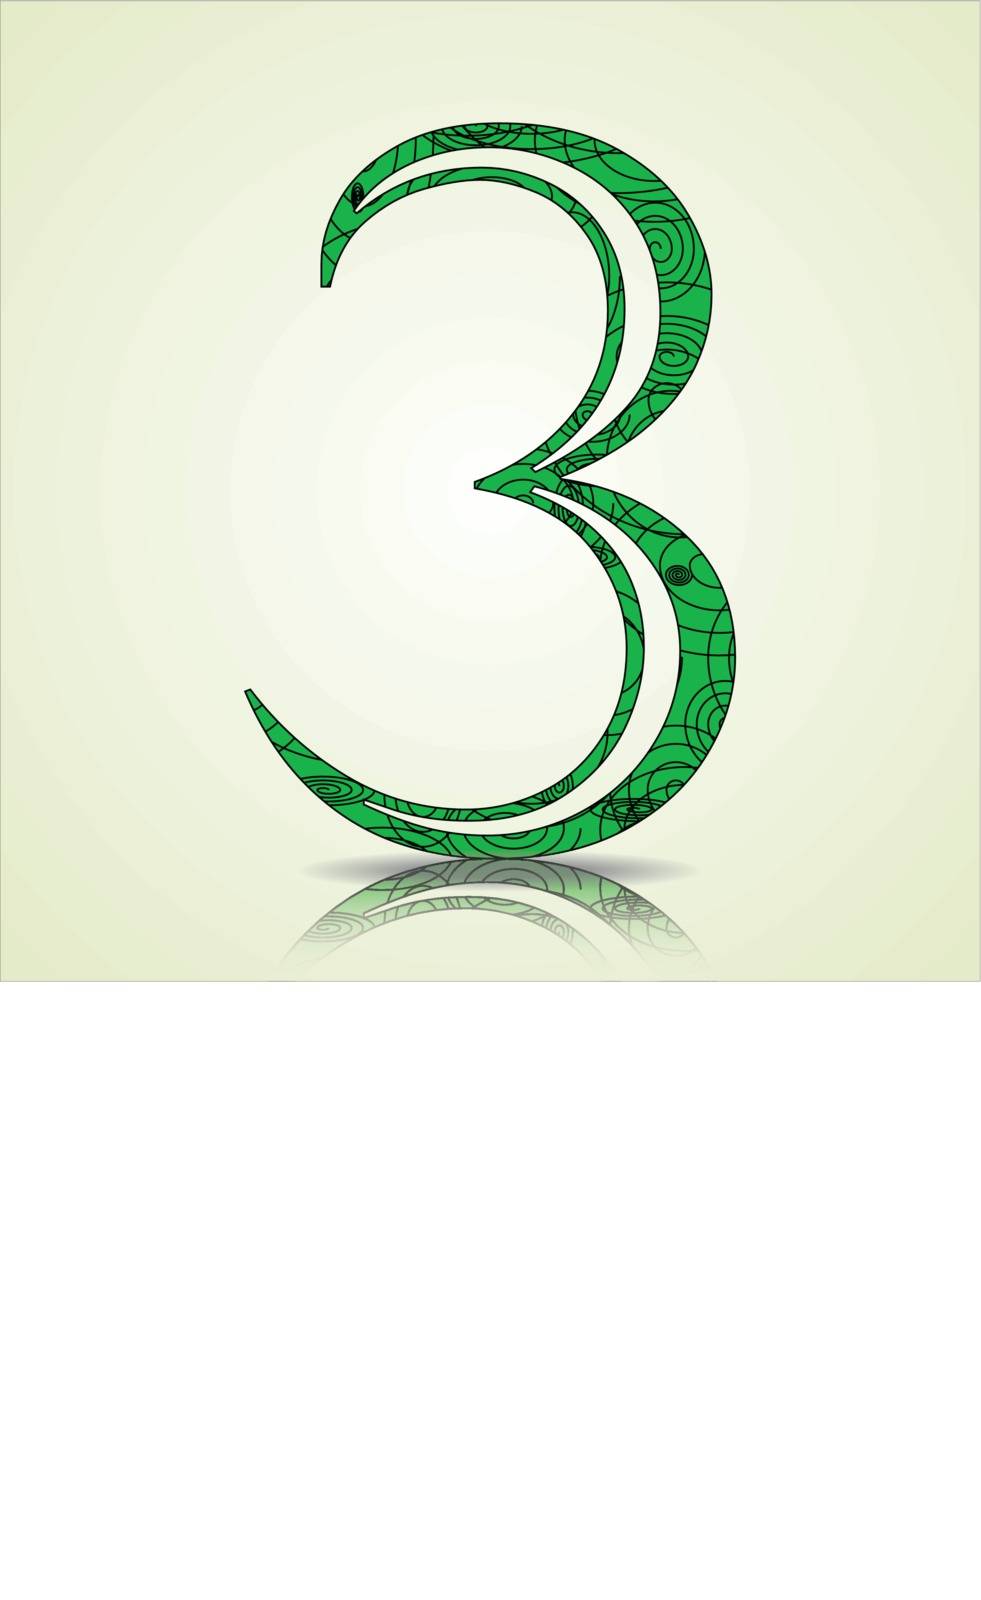 Number of Collection made of swirls - 3 Vector illustration